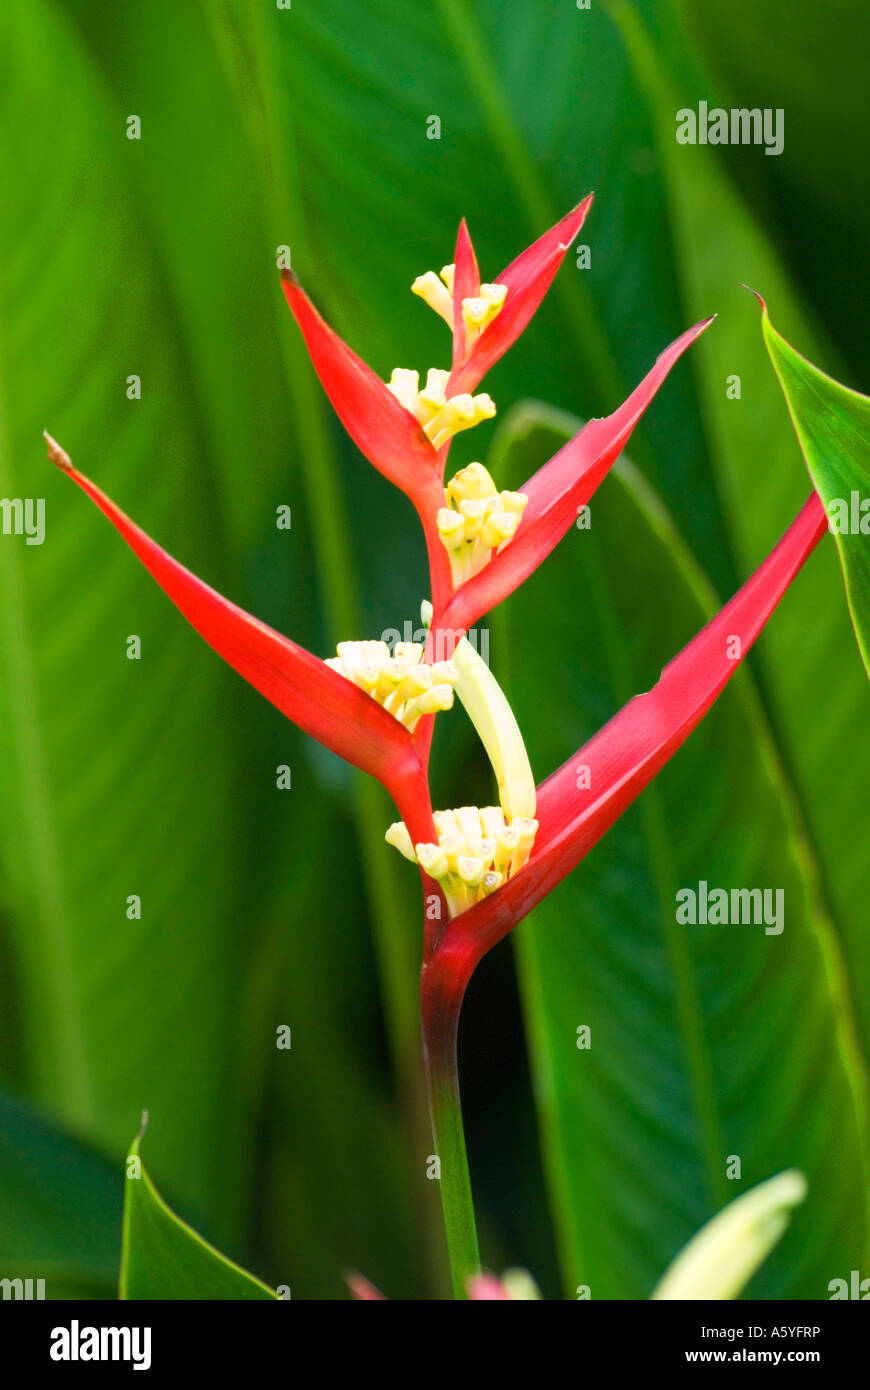 The South American red Heliconia angusta often called the Christmas heliconia because it flowers around Christmas time. Stock Photo